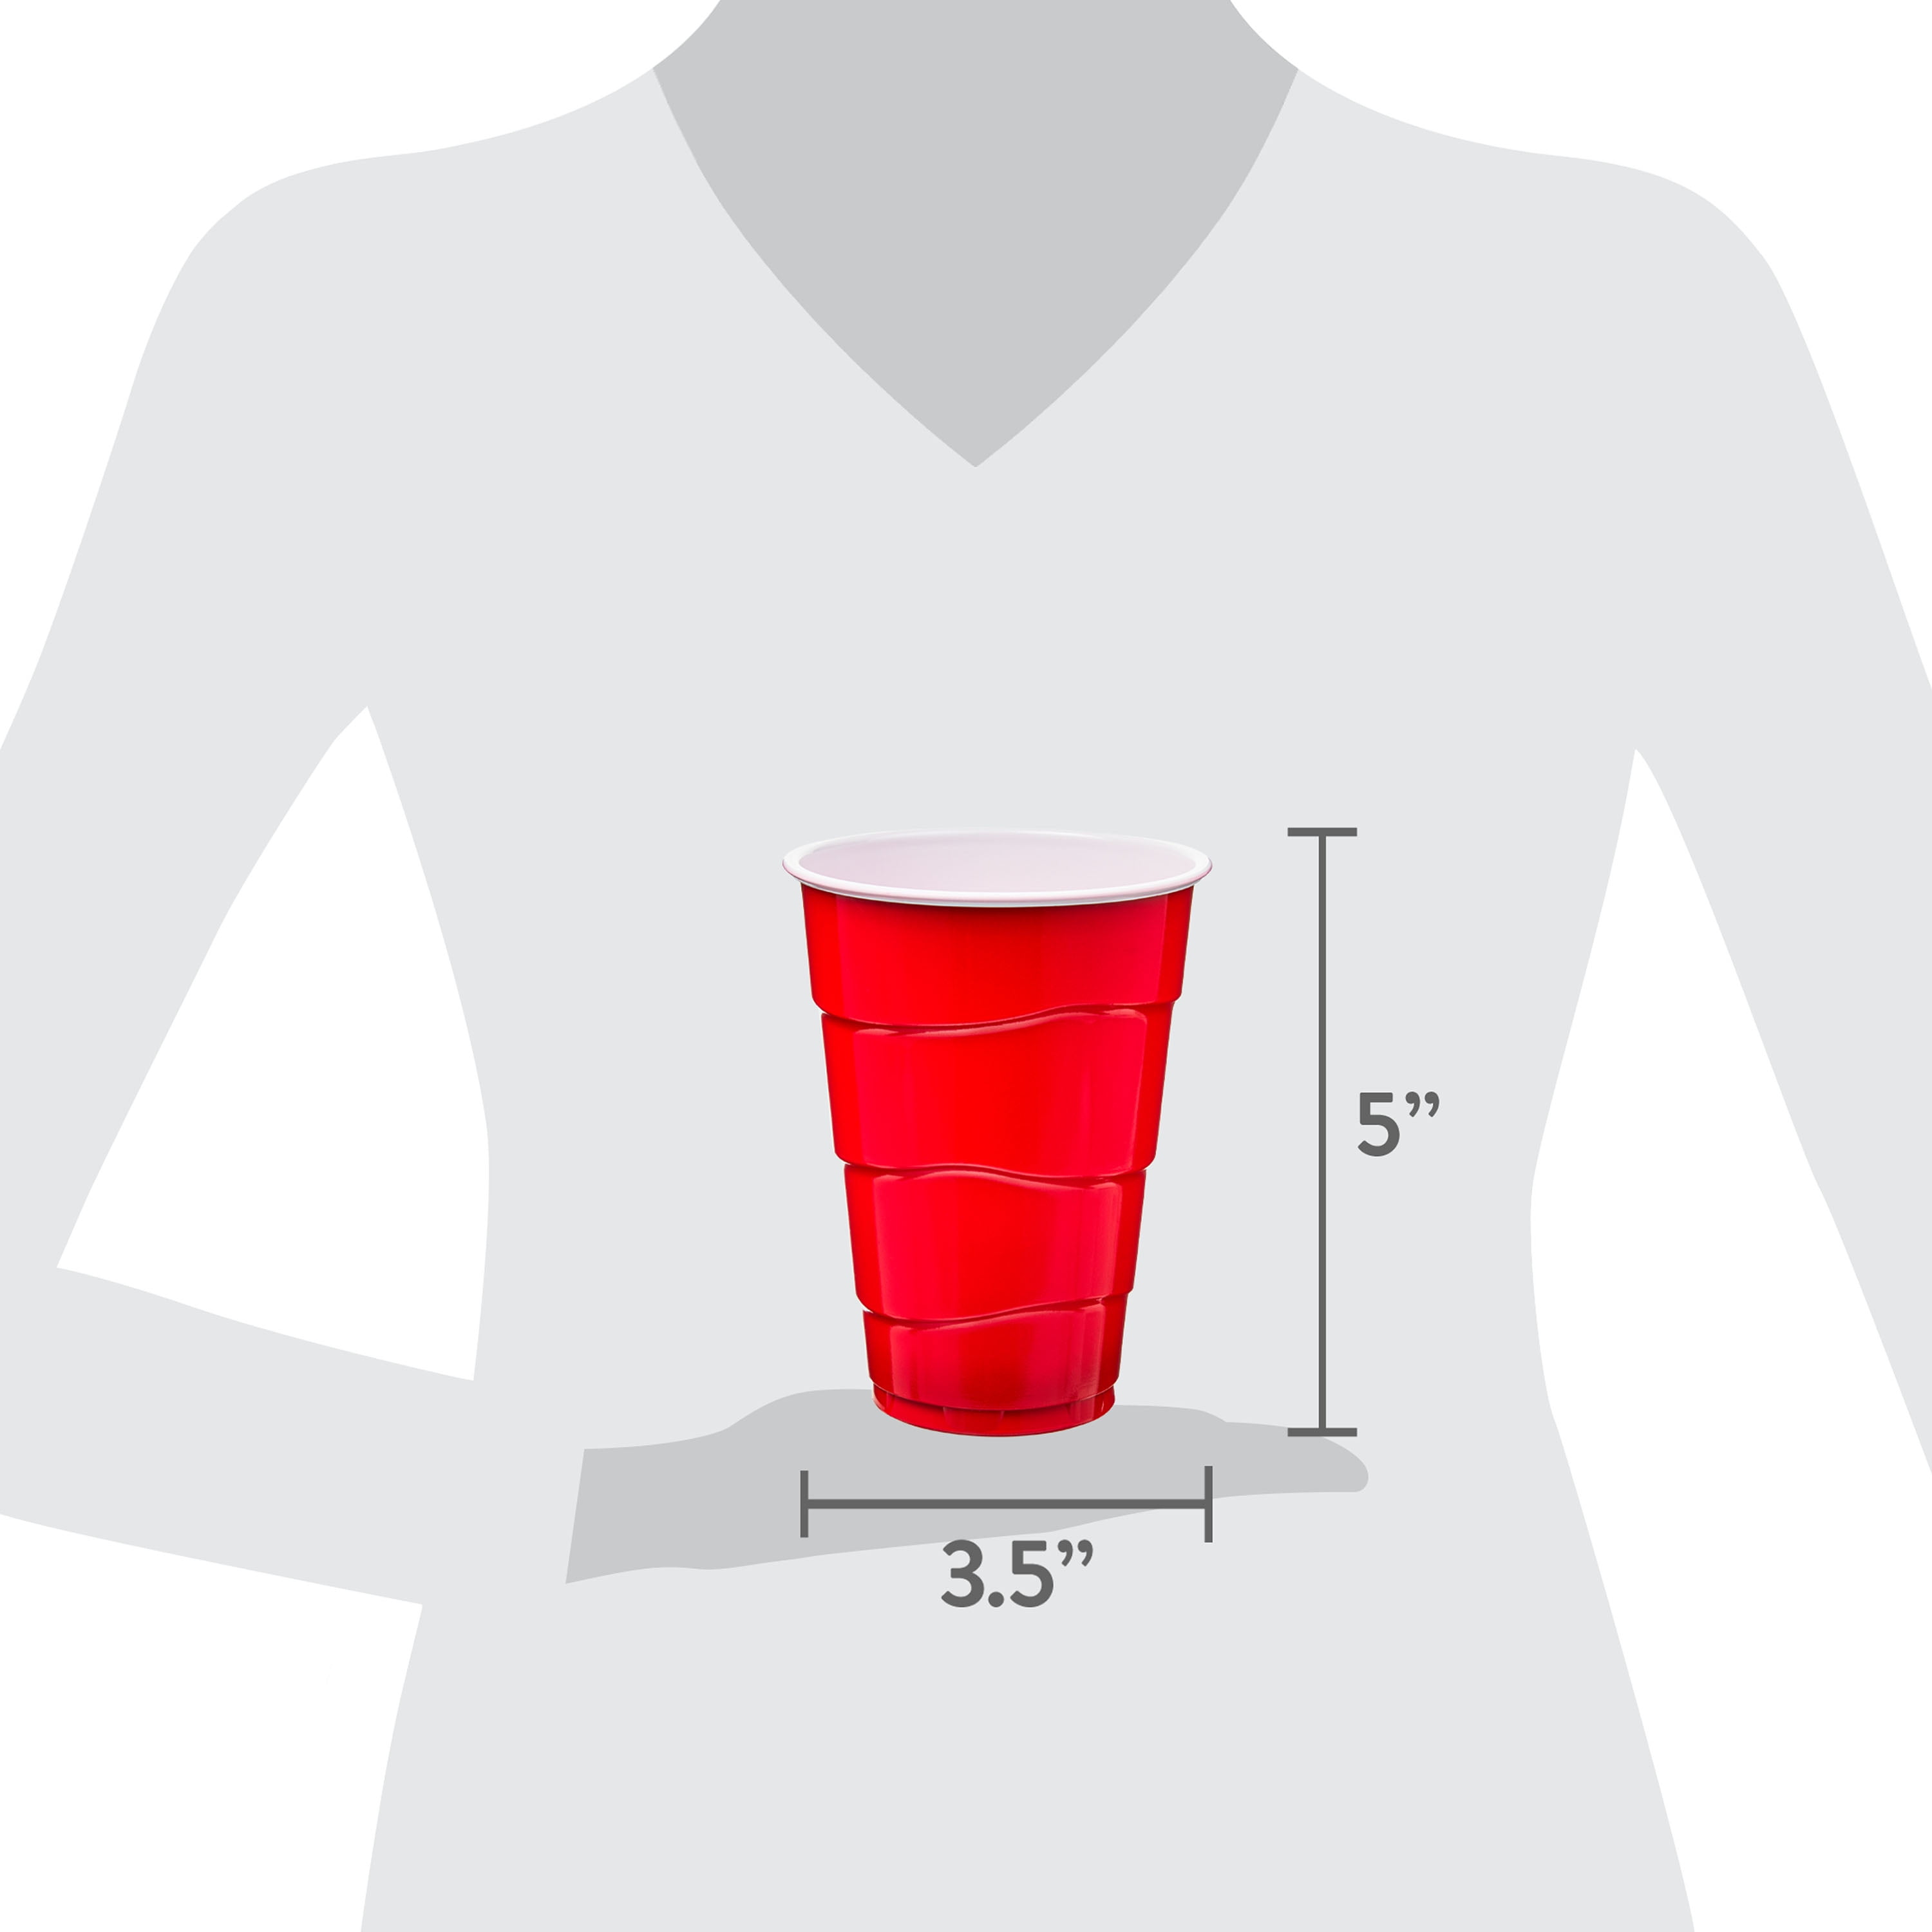 Big Lots Red Plastic 18 Oz. Heavy Duty Party Cups, 120-Count